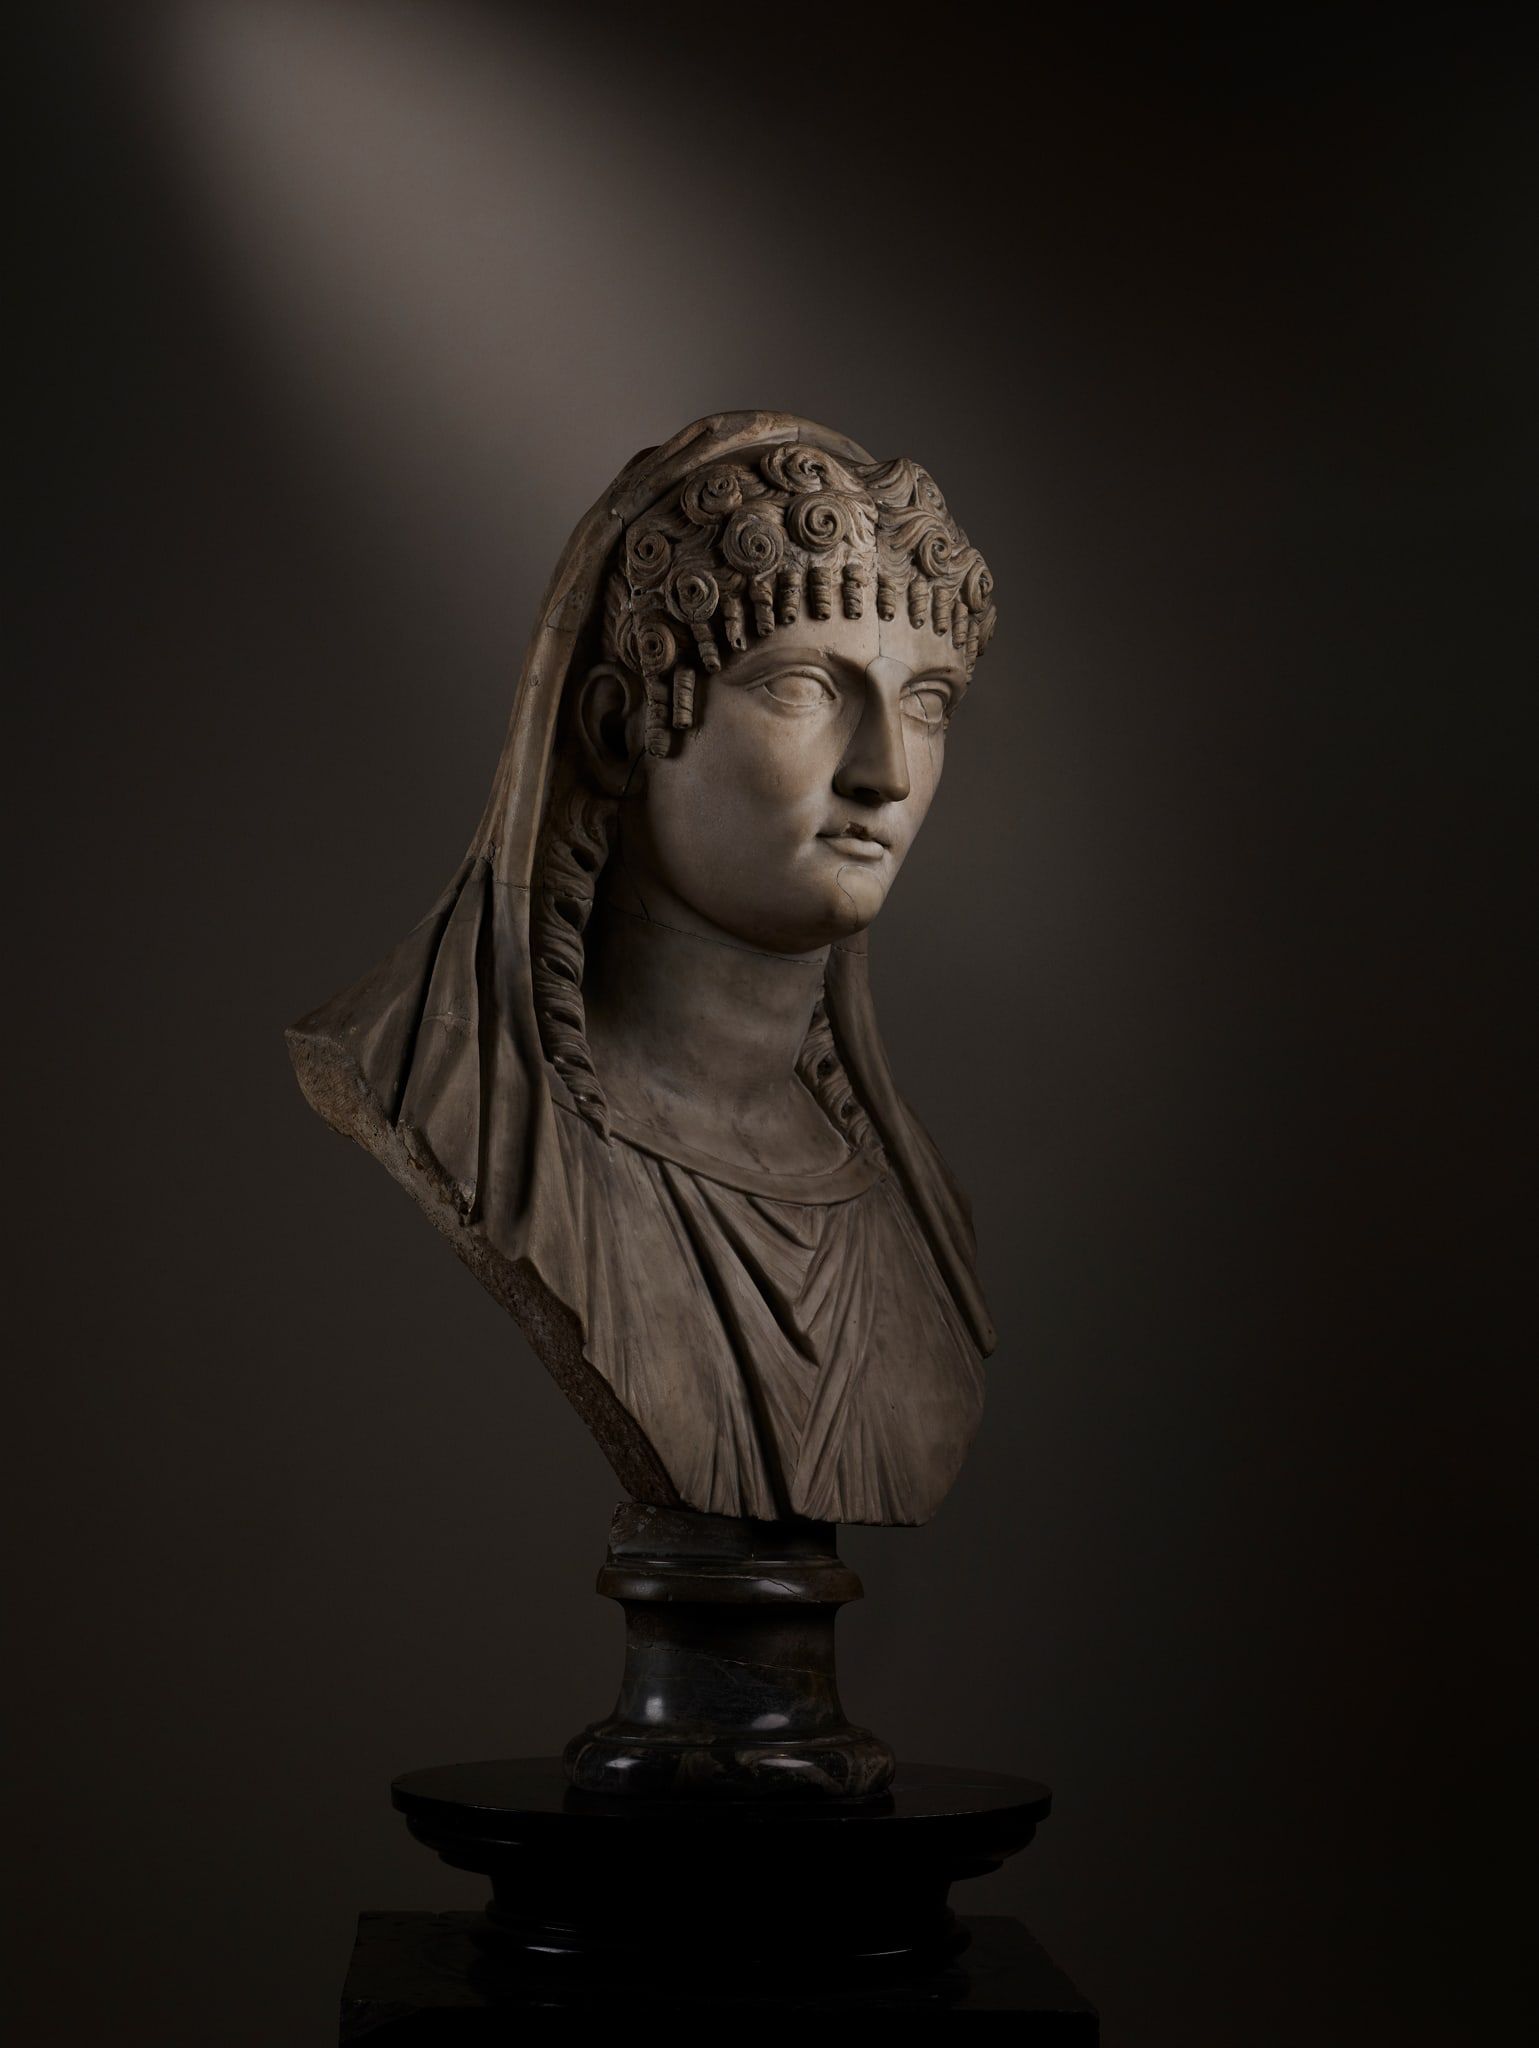 Trio of Roman portrait busts of women earned almost $1.6M at Lyon and Turnbull